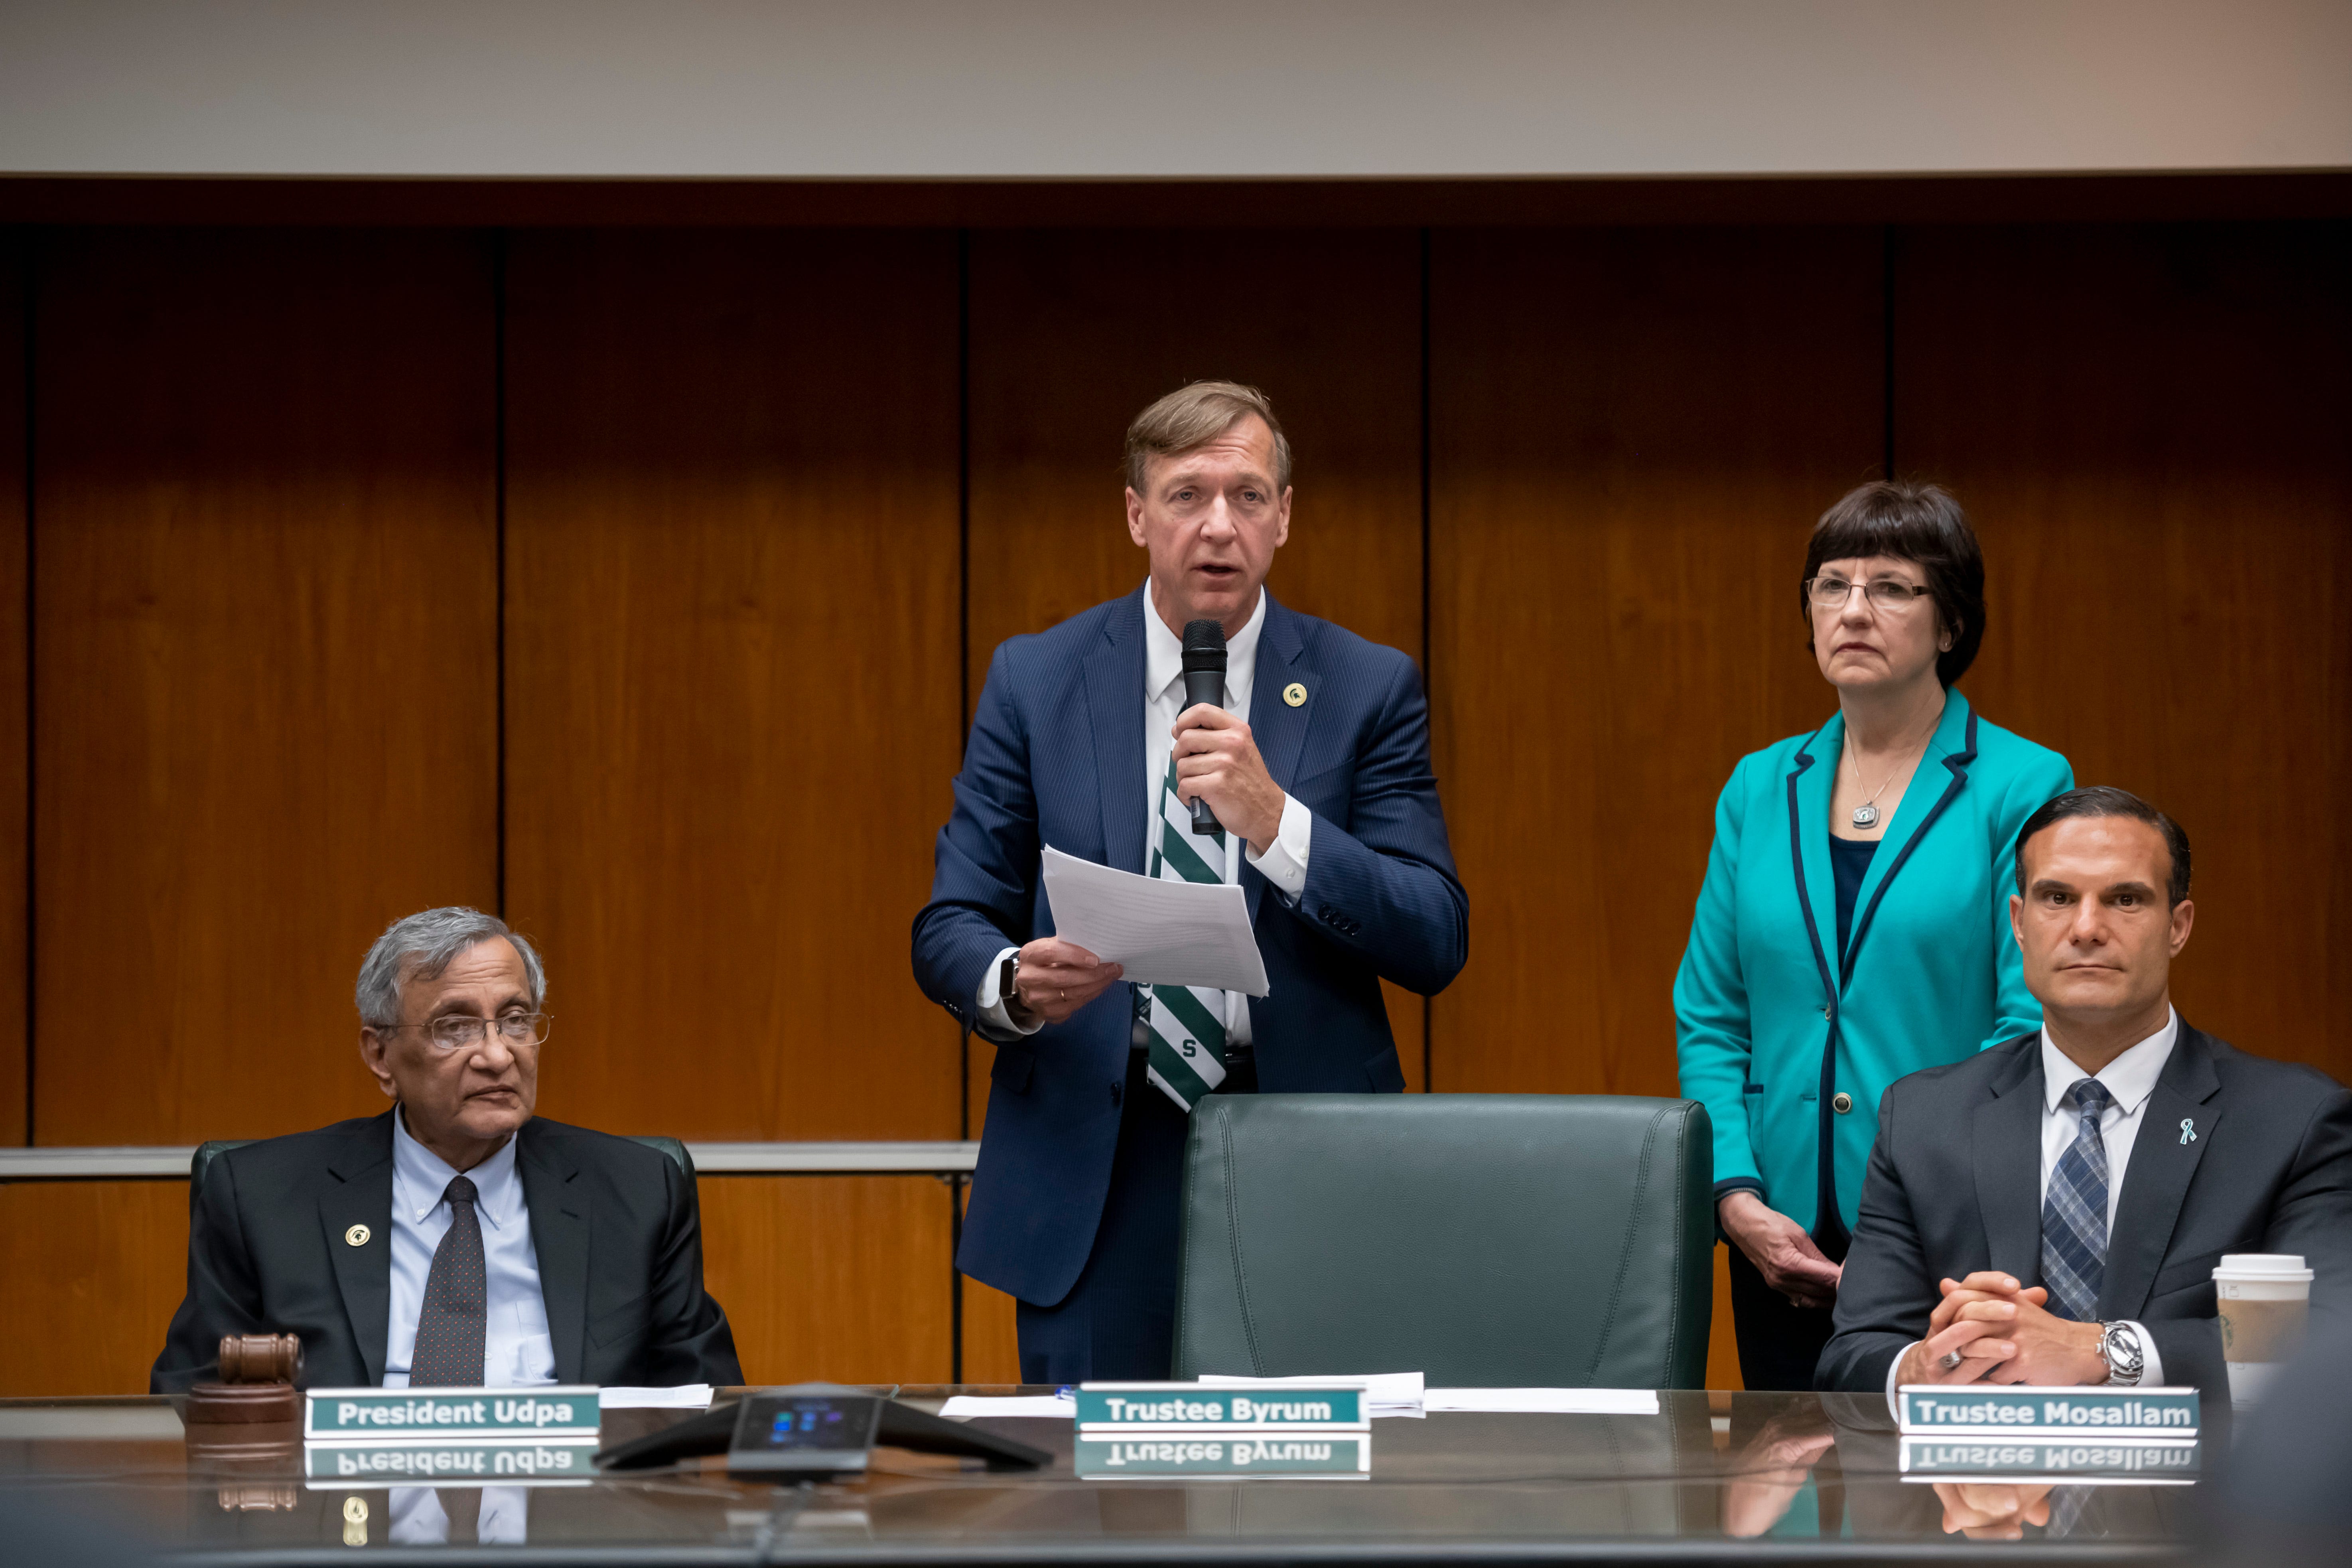 From left, acting president Satish Udpa, incoming president Samuel Stanley Jr., trustee chair Dianne Byrum, and trustee Brian Mosallam listen to Stanley address a special session of the Michigan State University board of trustees that voted to elect him the 21st president of the university, May 28, 2019.